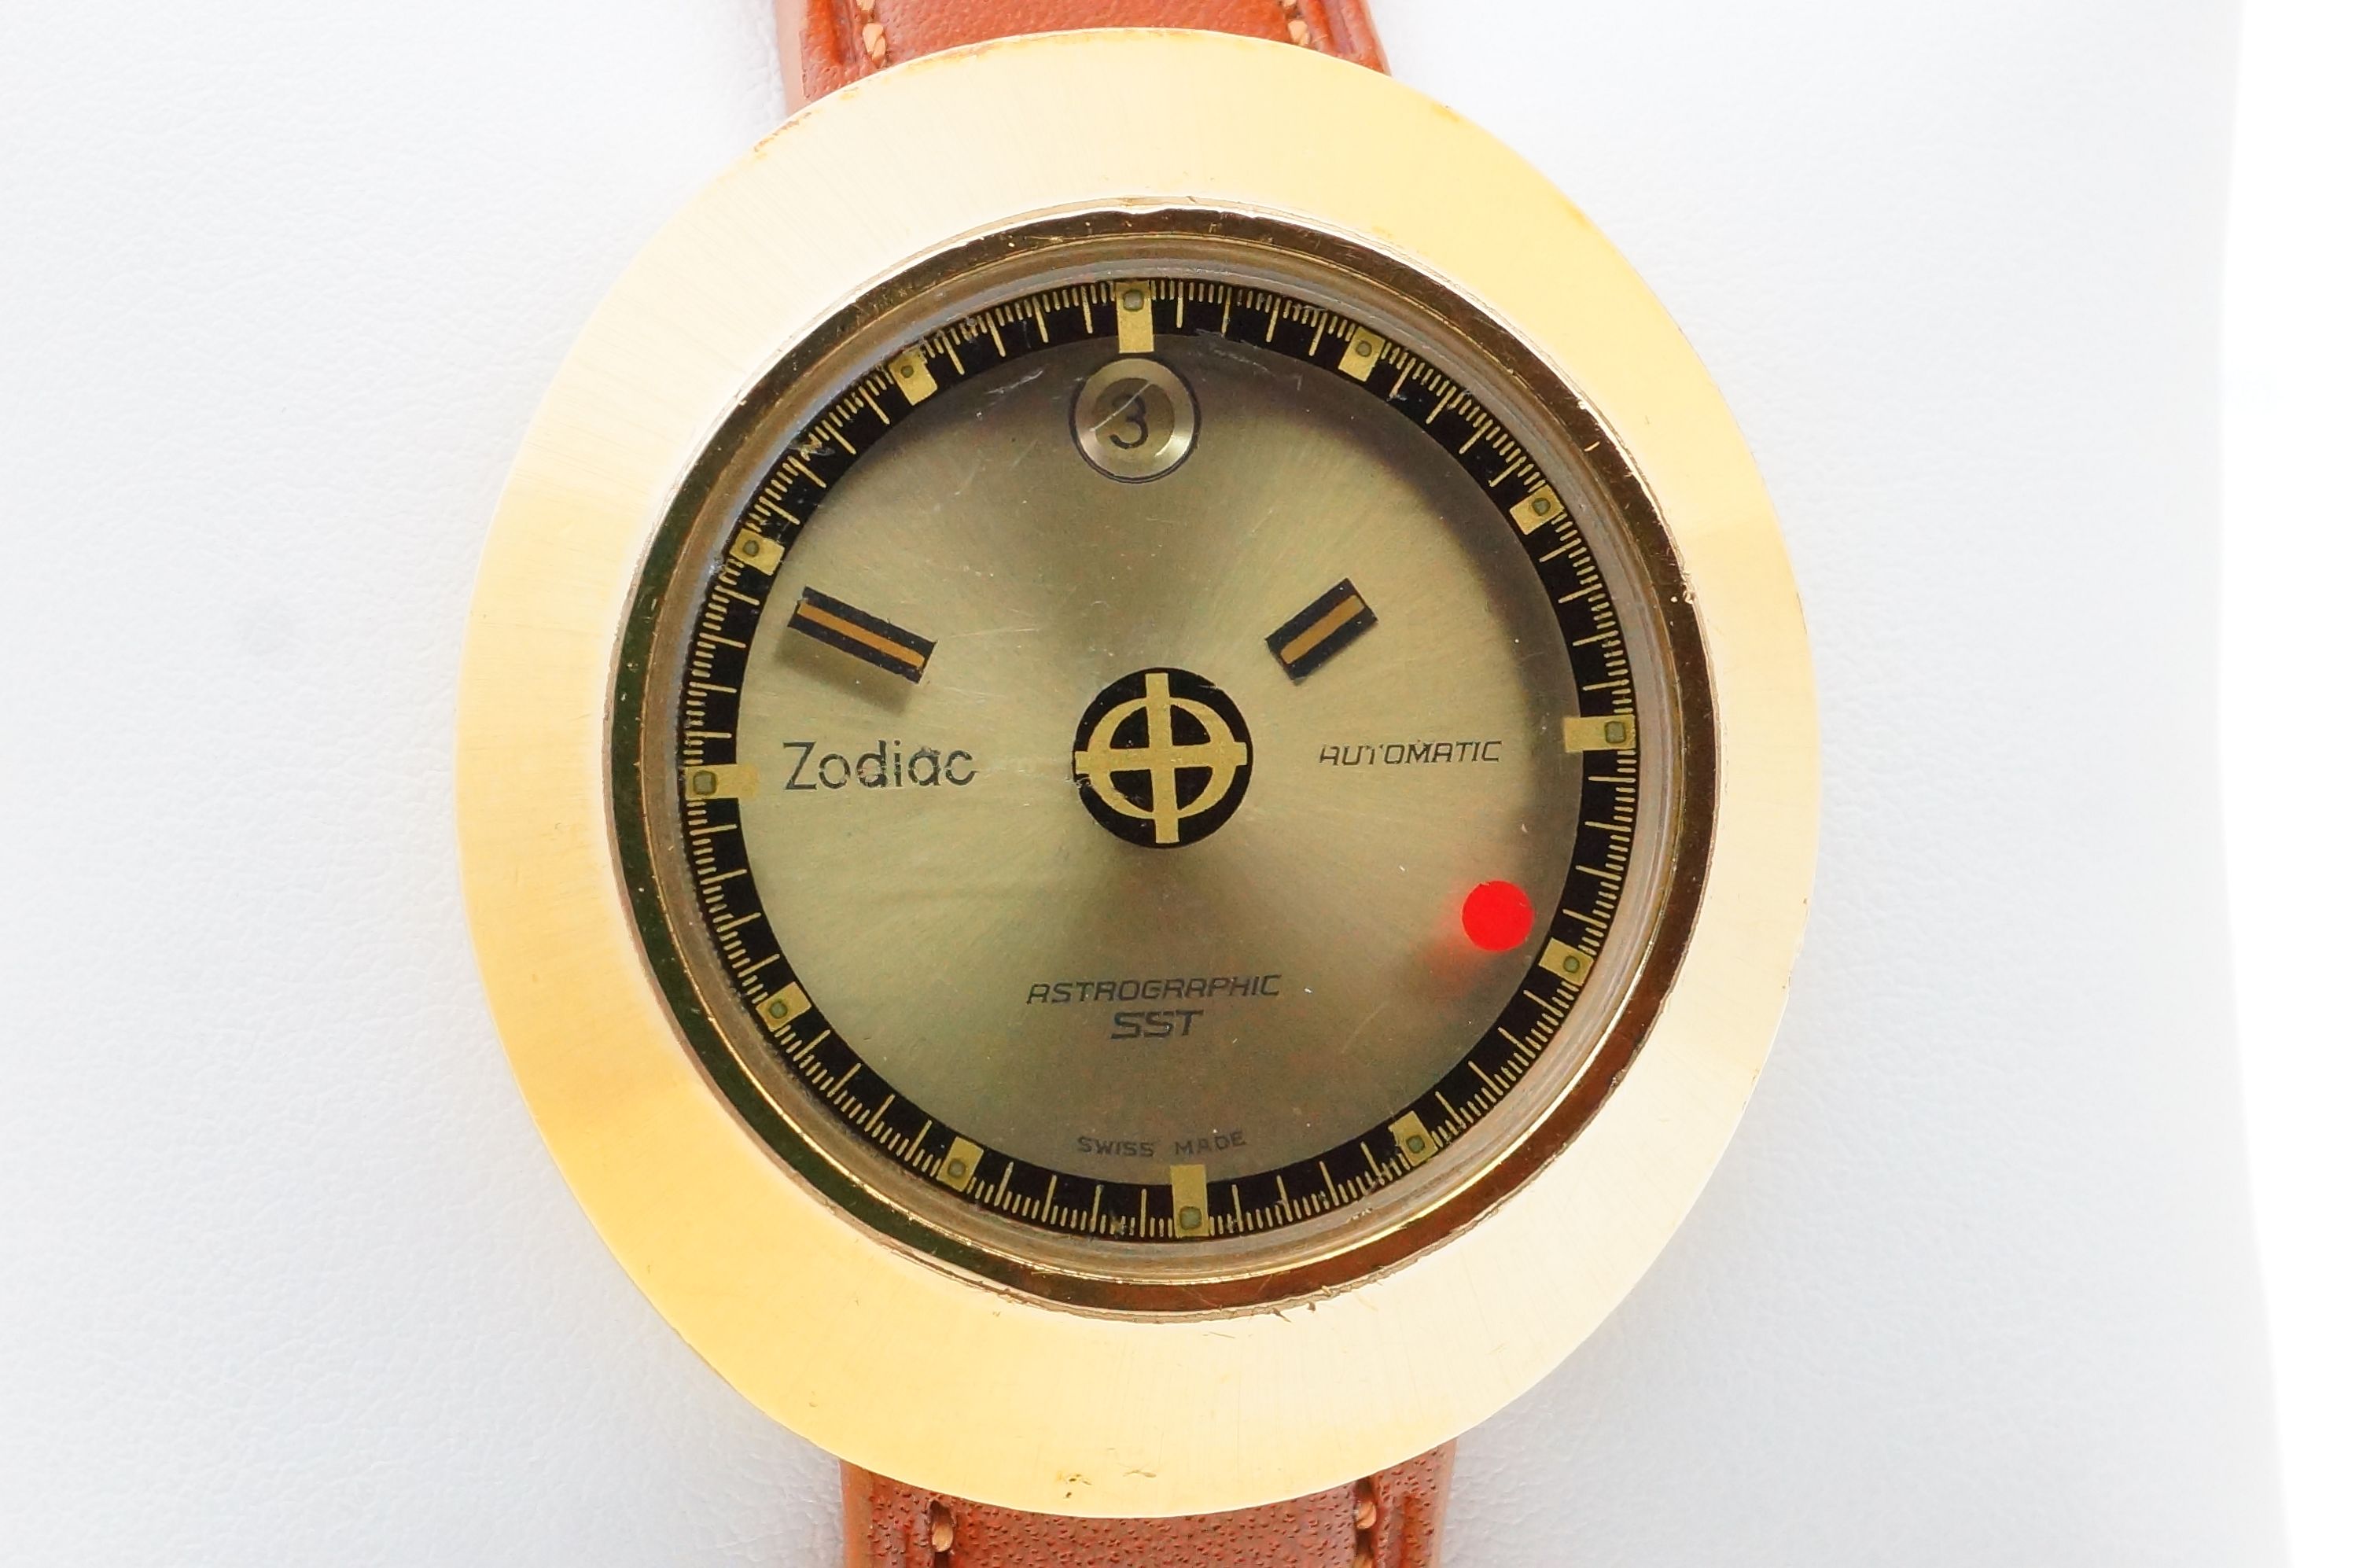 Zodiac Astrographic SST Automatic Mystery Dial – Kaliber 88D